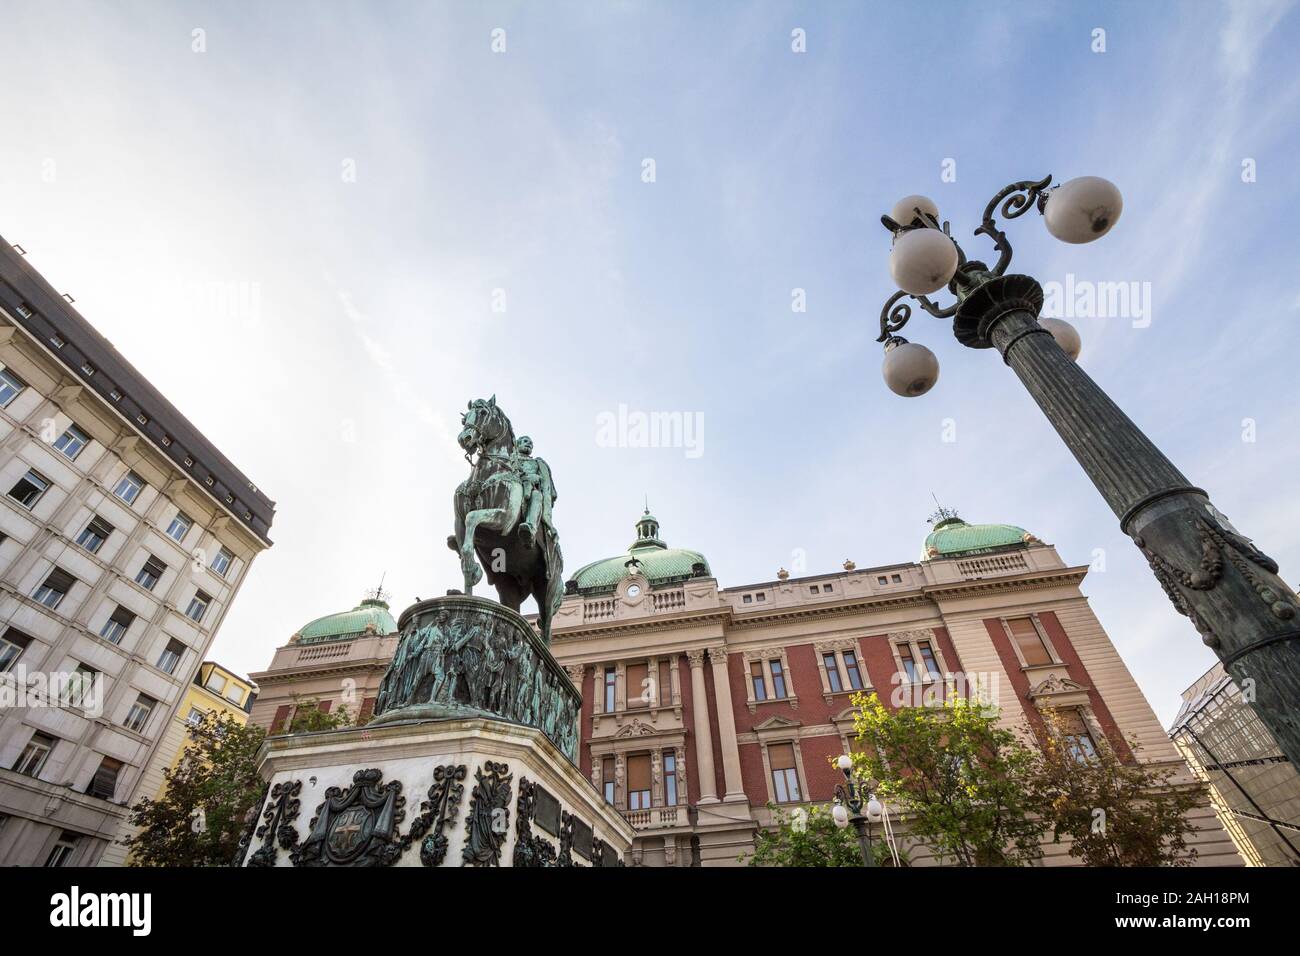 Prince Mihailo (Knez Mihailo) statue in front of the National Museum of Serbia on Republic Square (Trg Republike) in Belgrade, Serbia. Also called Kod Stock Photo